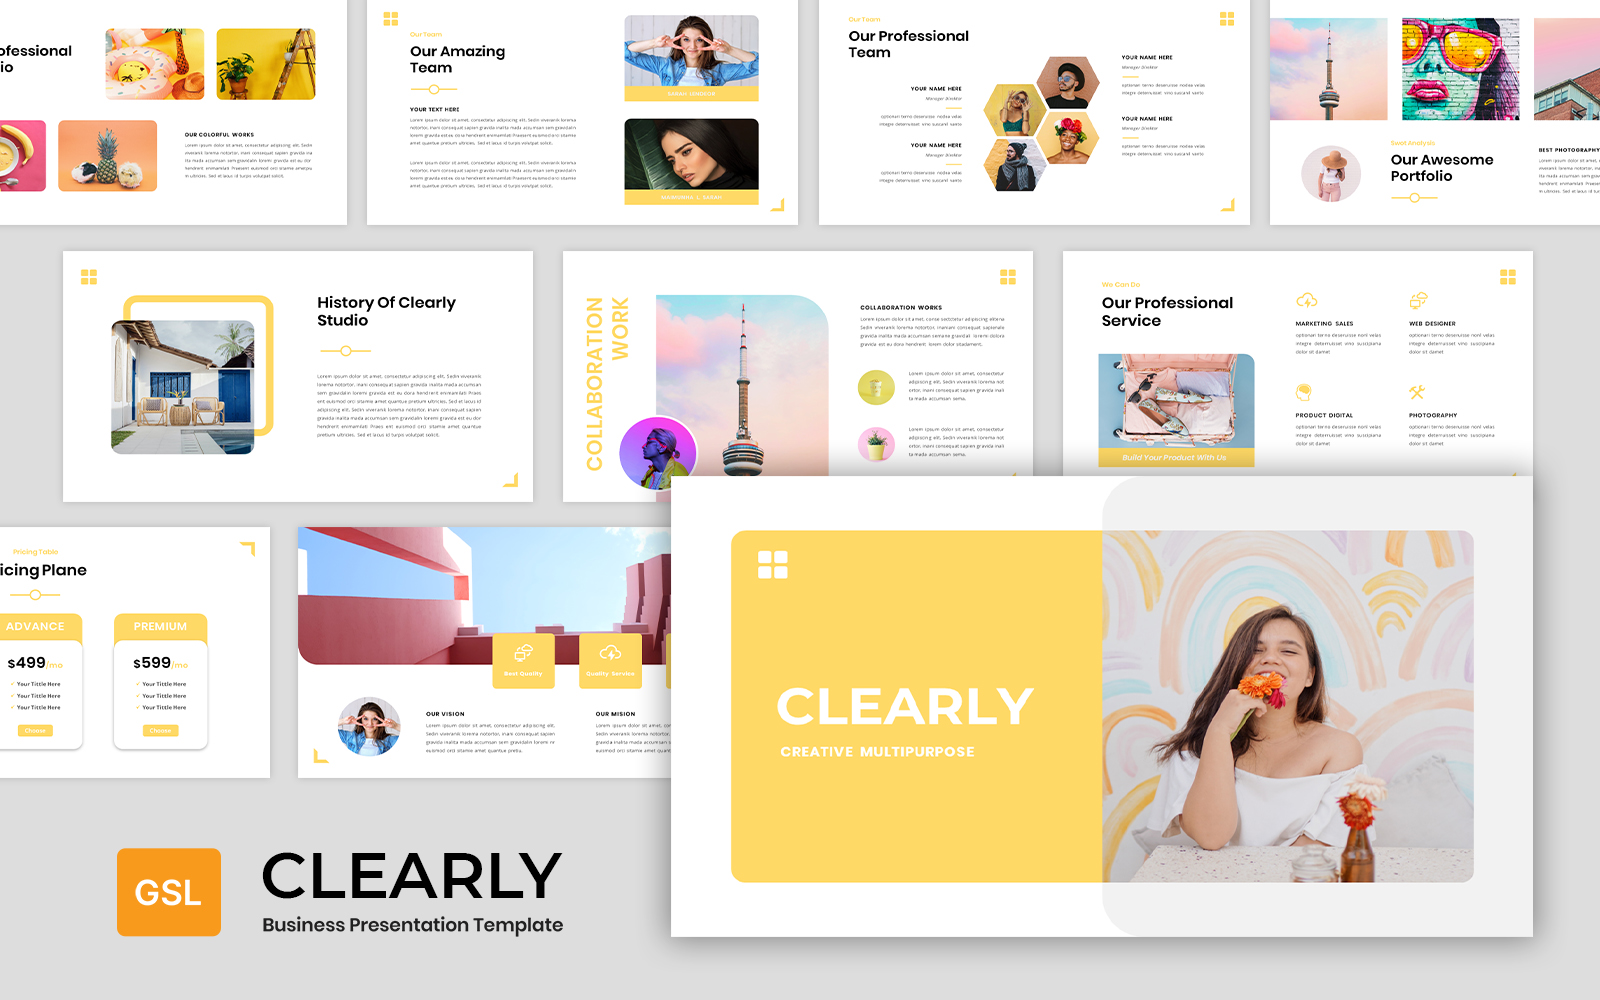 Clearly - Business Presentation Google Slide Template